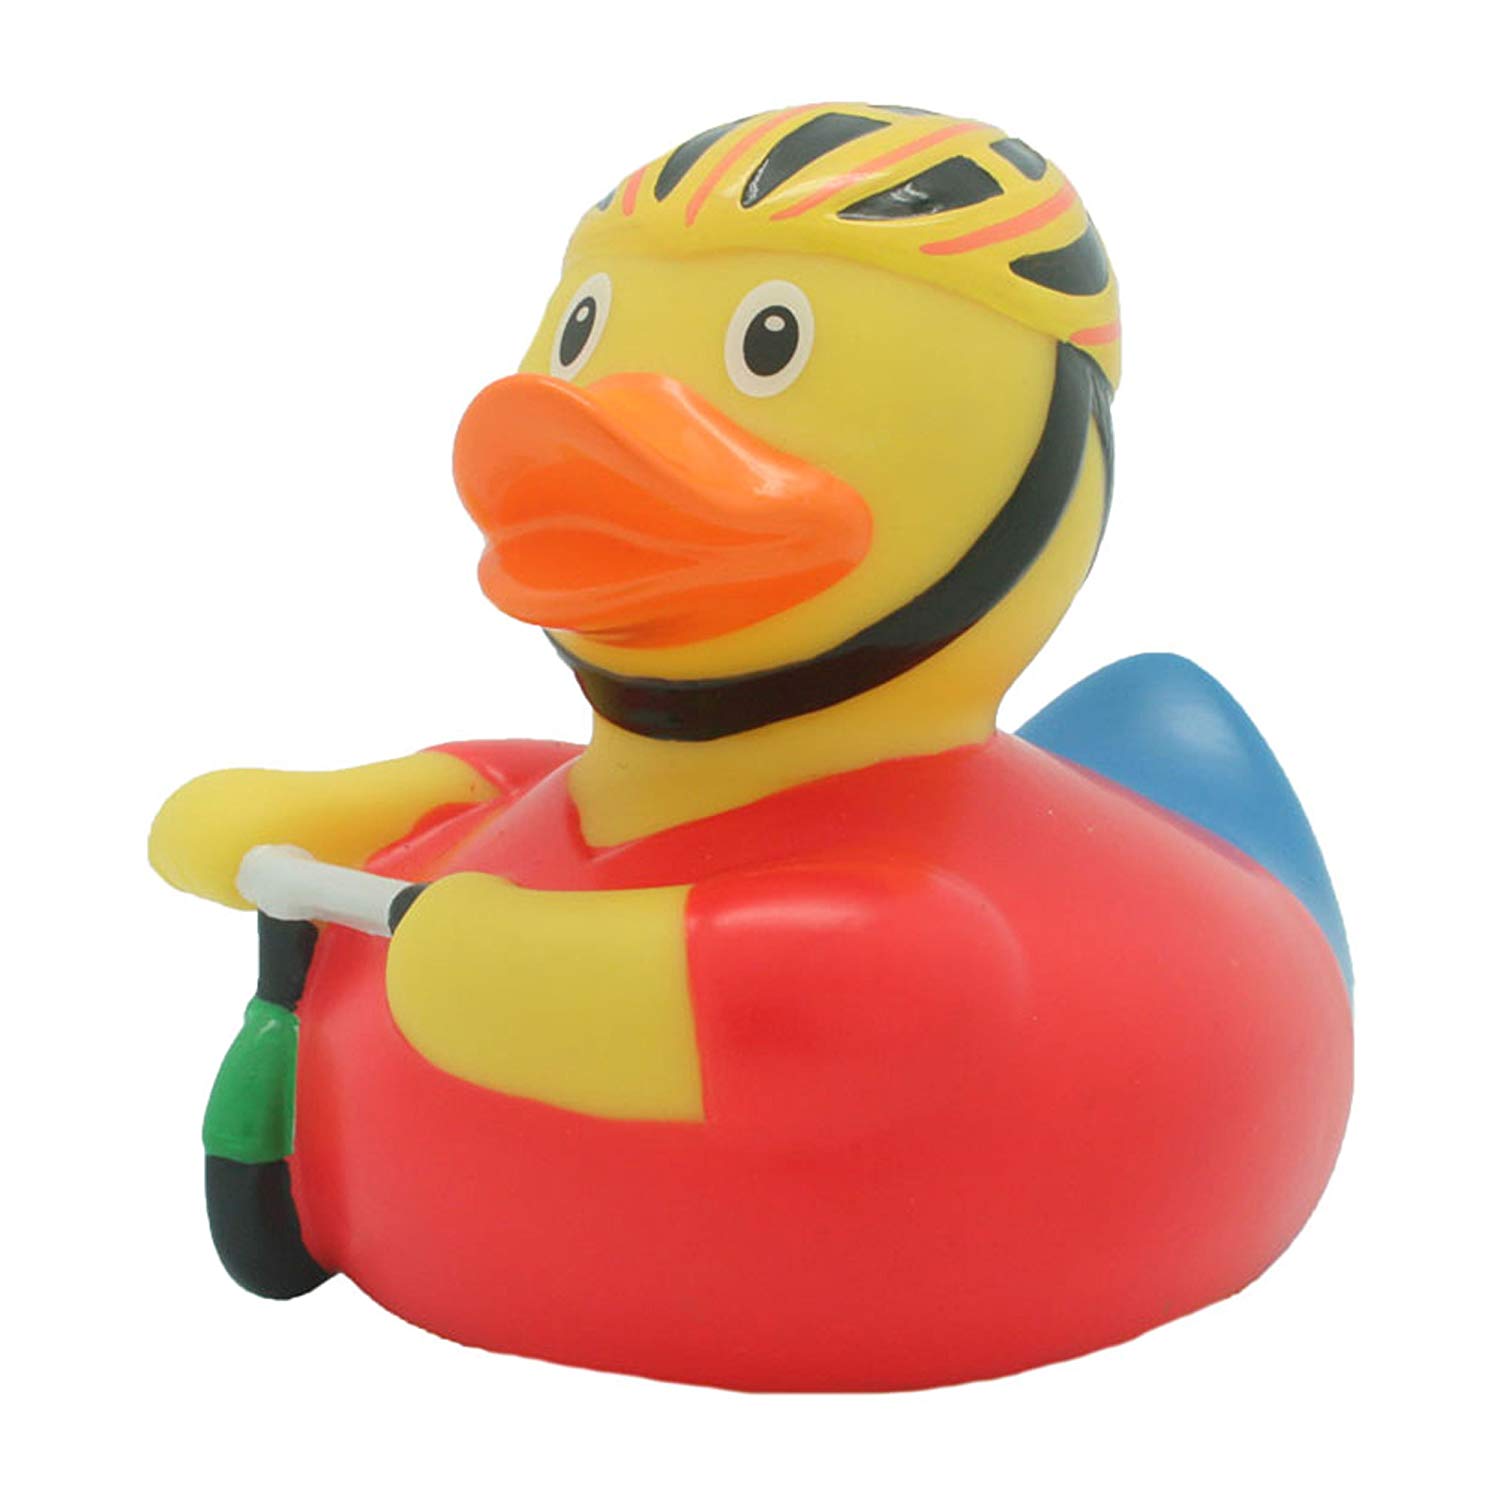 Cycling Rubber Duck - The Calendar and Gift Company